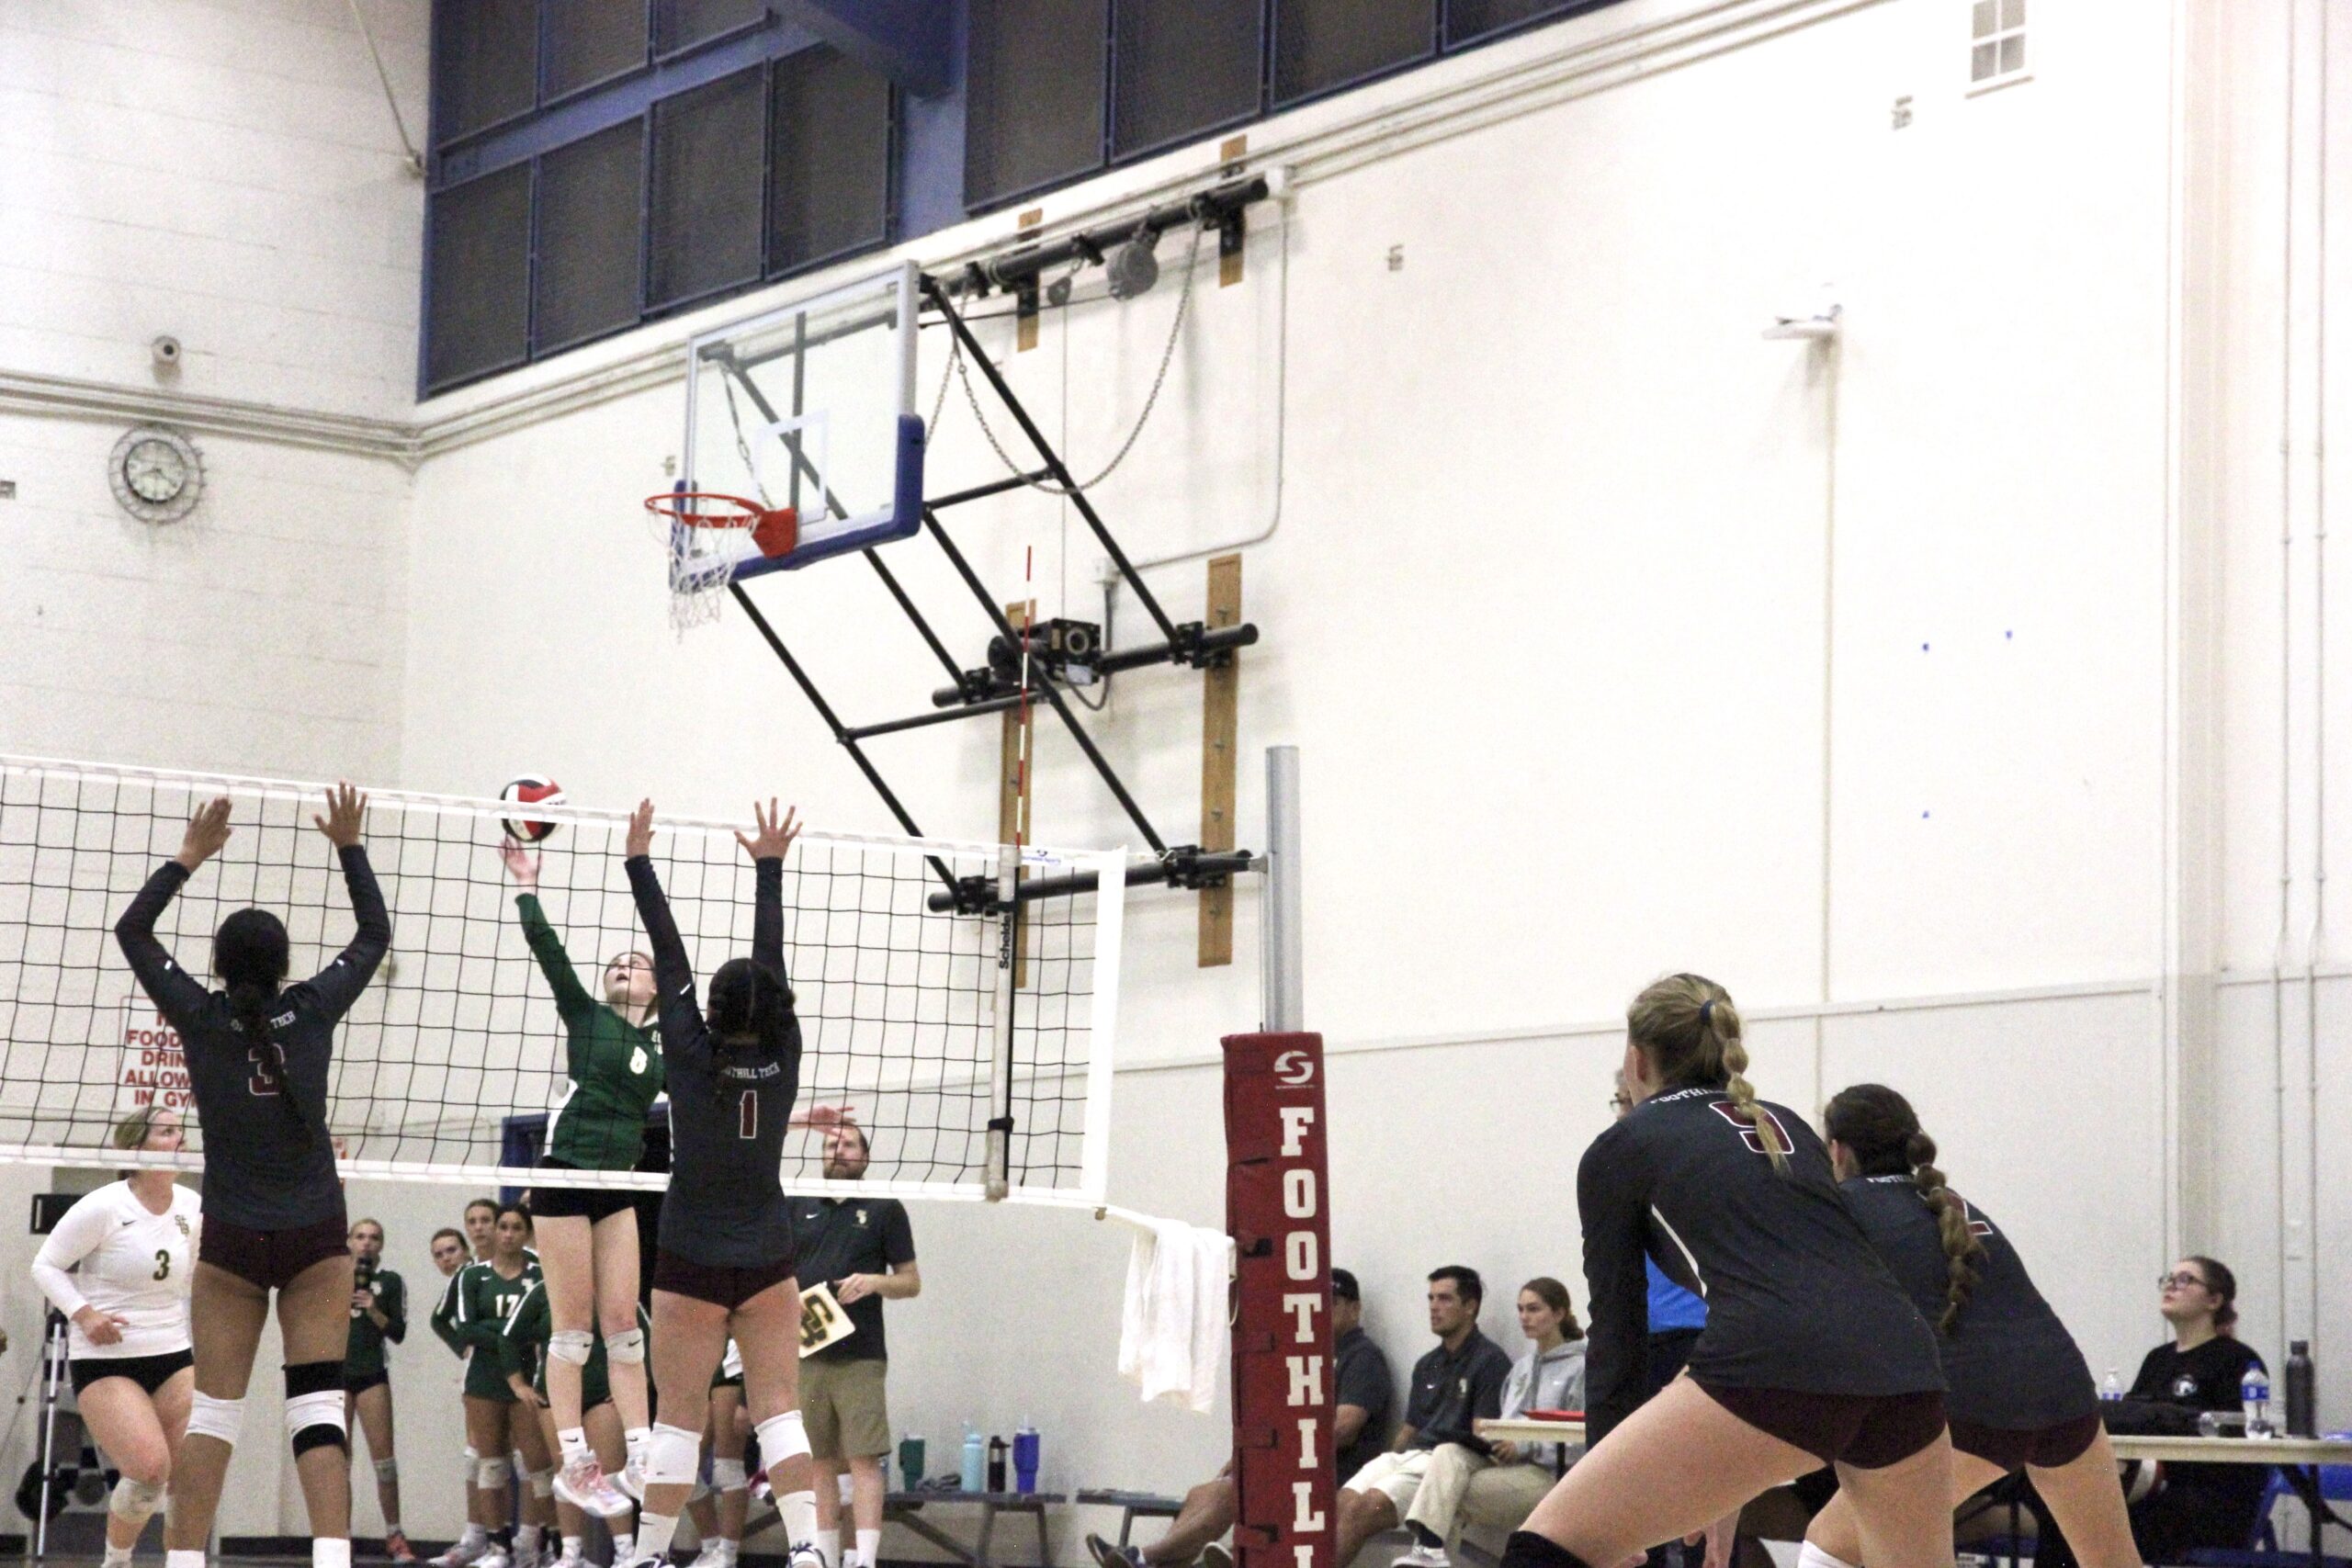 Isabella De La Rosa 24 (number 3) and Charlis Swezy 27 (number 1) block from the net, while Malia Gray 24 (number 9) and Morgan Houston 25 (number 2) stay behind to cover any unexpected plays from the other team.